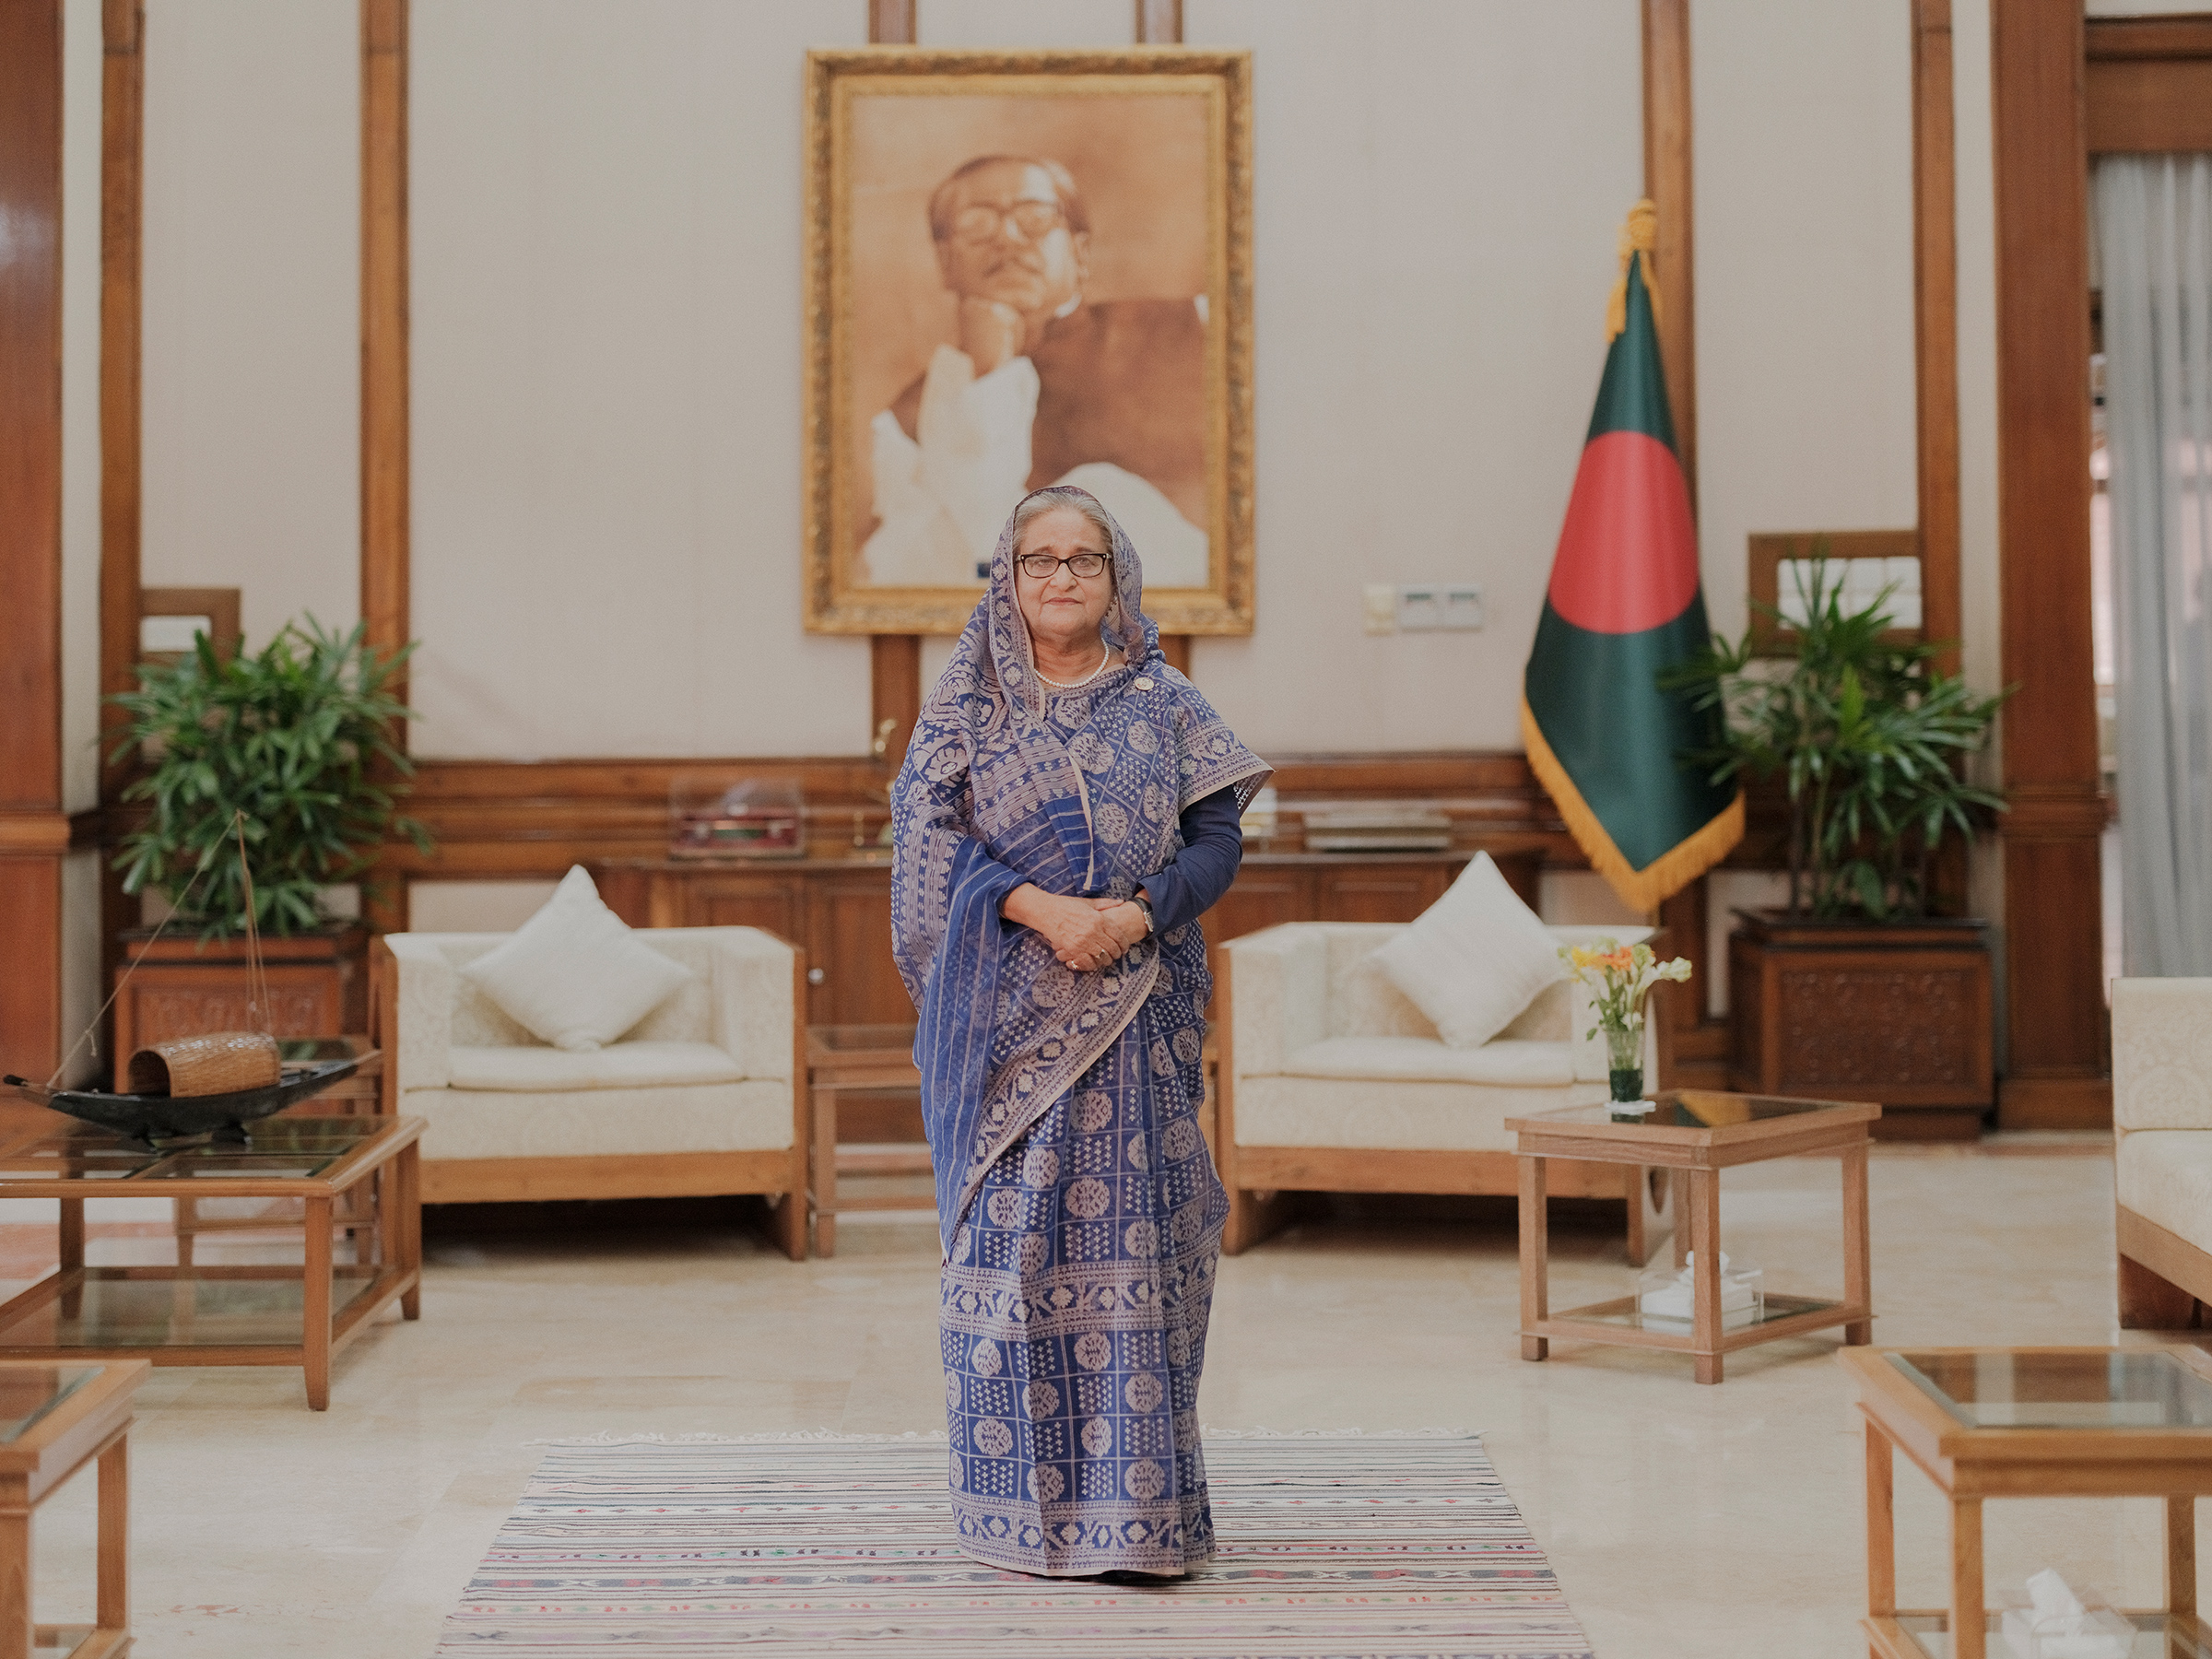 Bangladesh Prime Minister Sheikh Hasina at the Ganabhaban, the official residence, in Dhaka on Sept. 6.